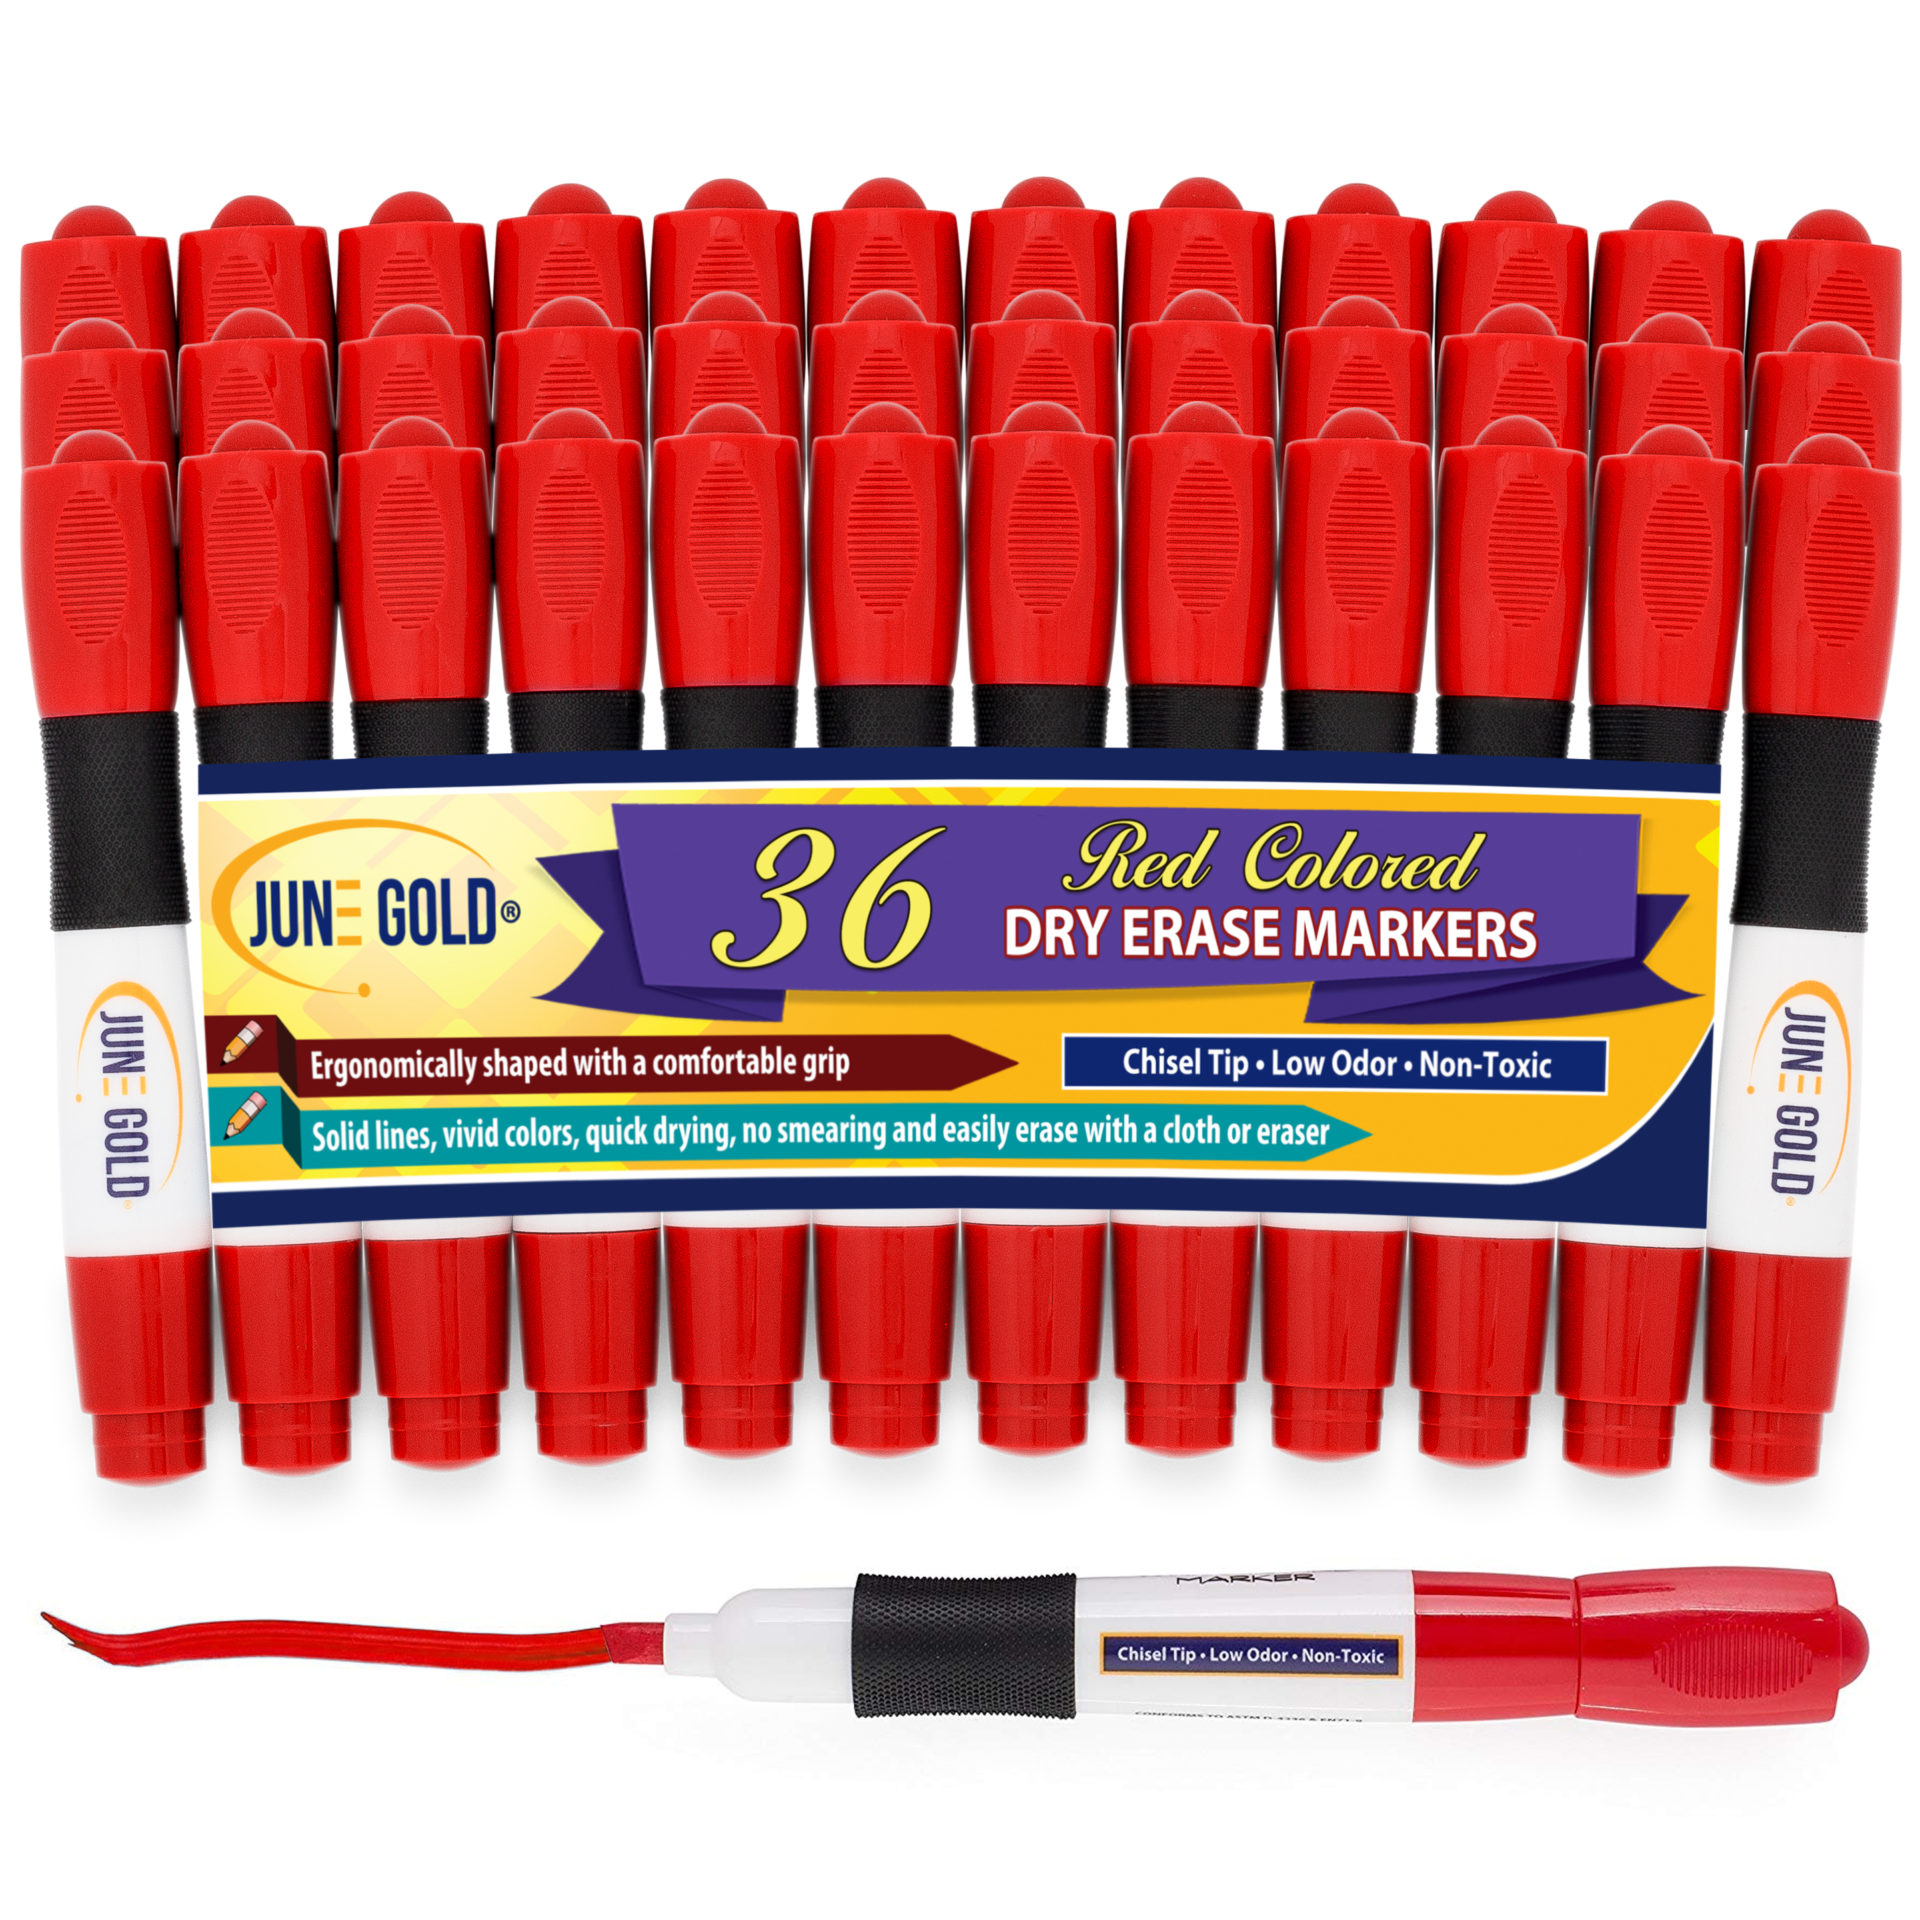 Dry Erase Markers – June Gold